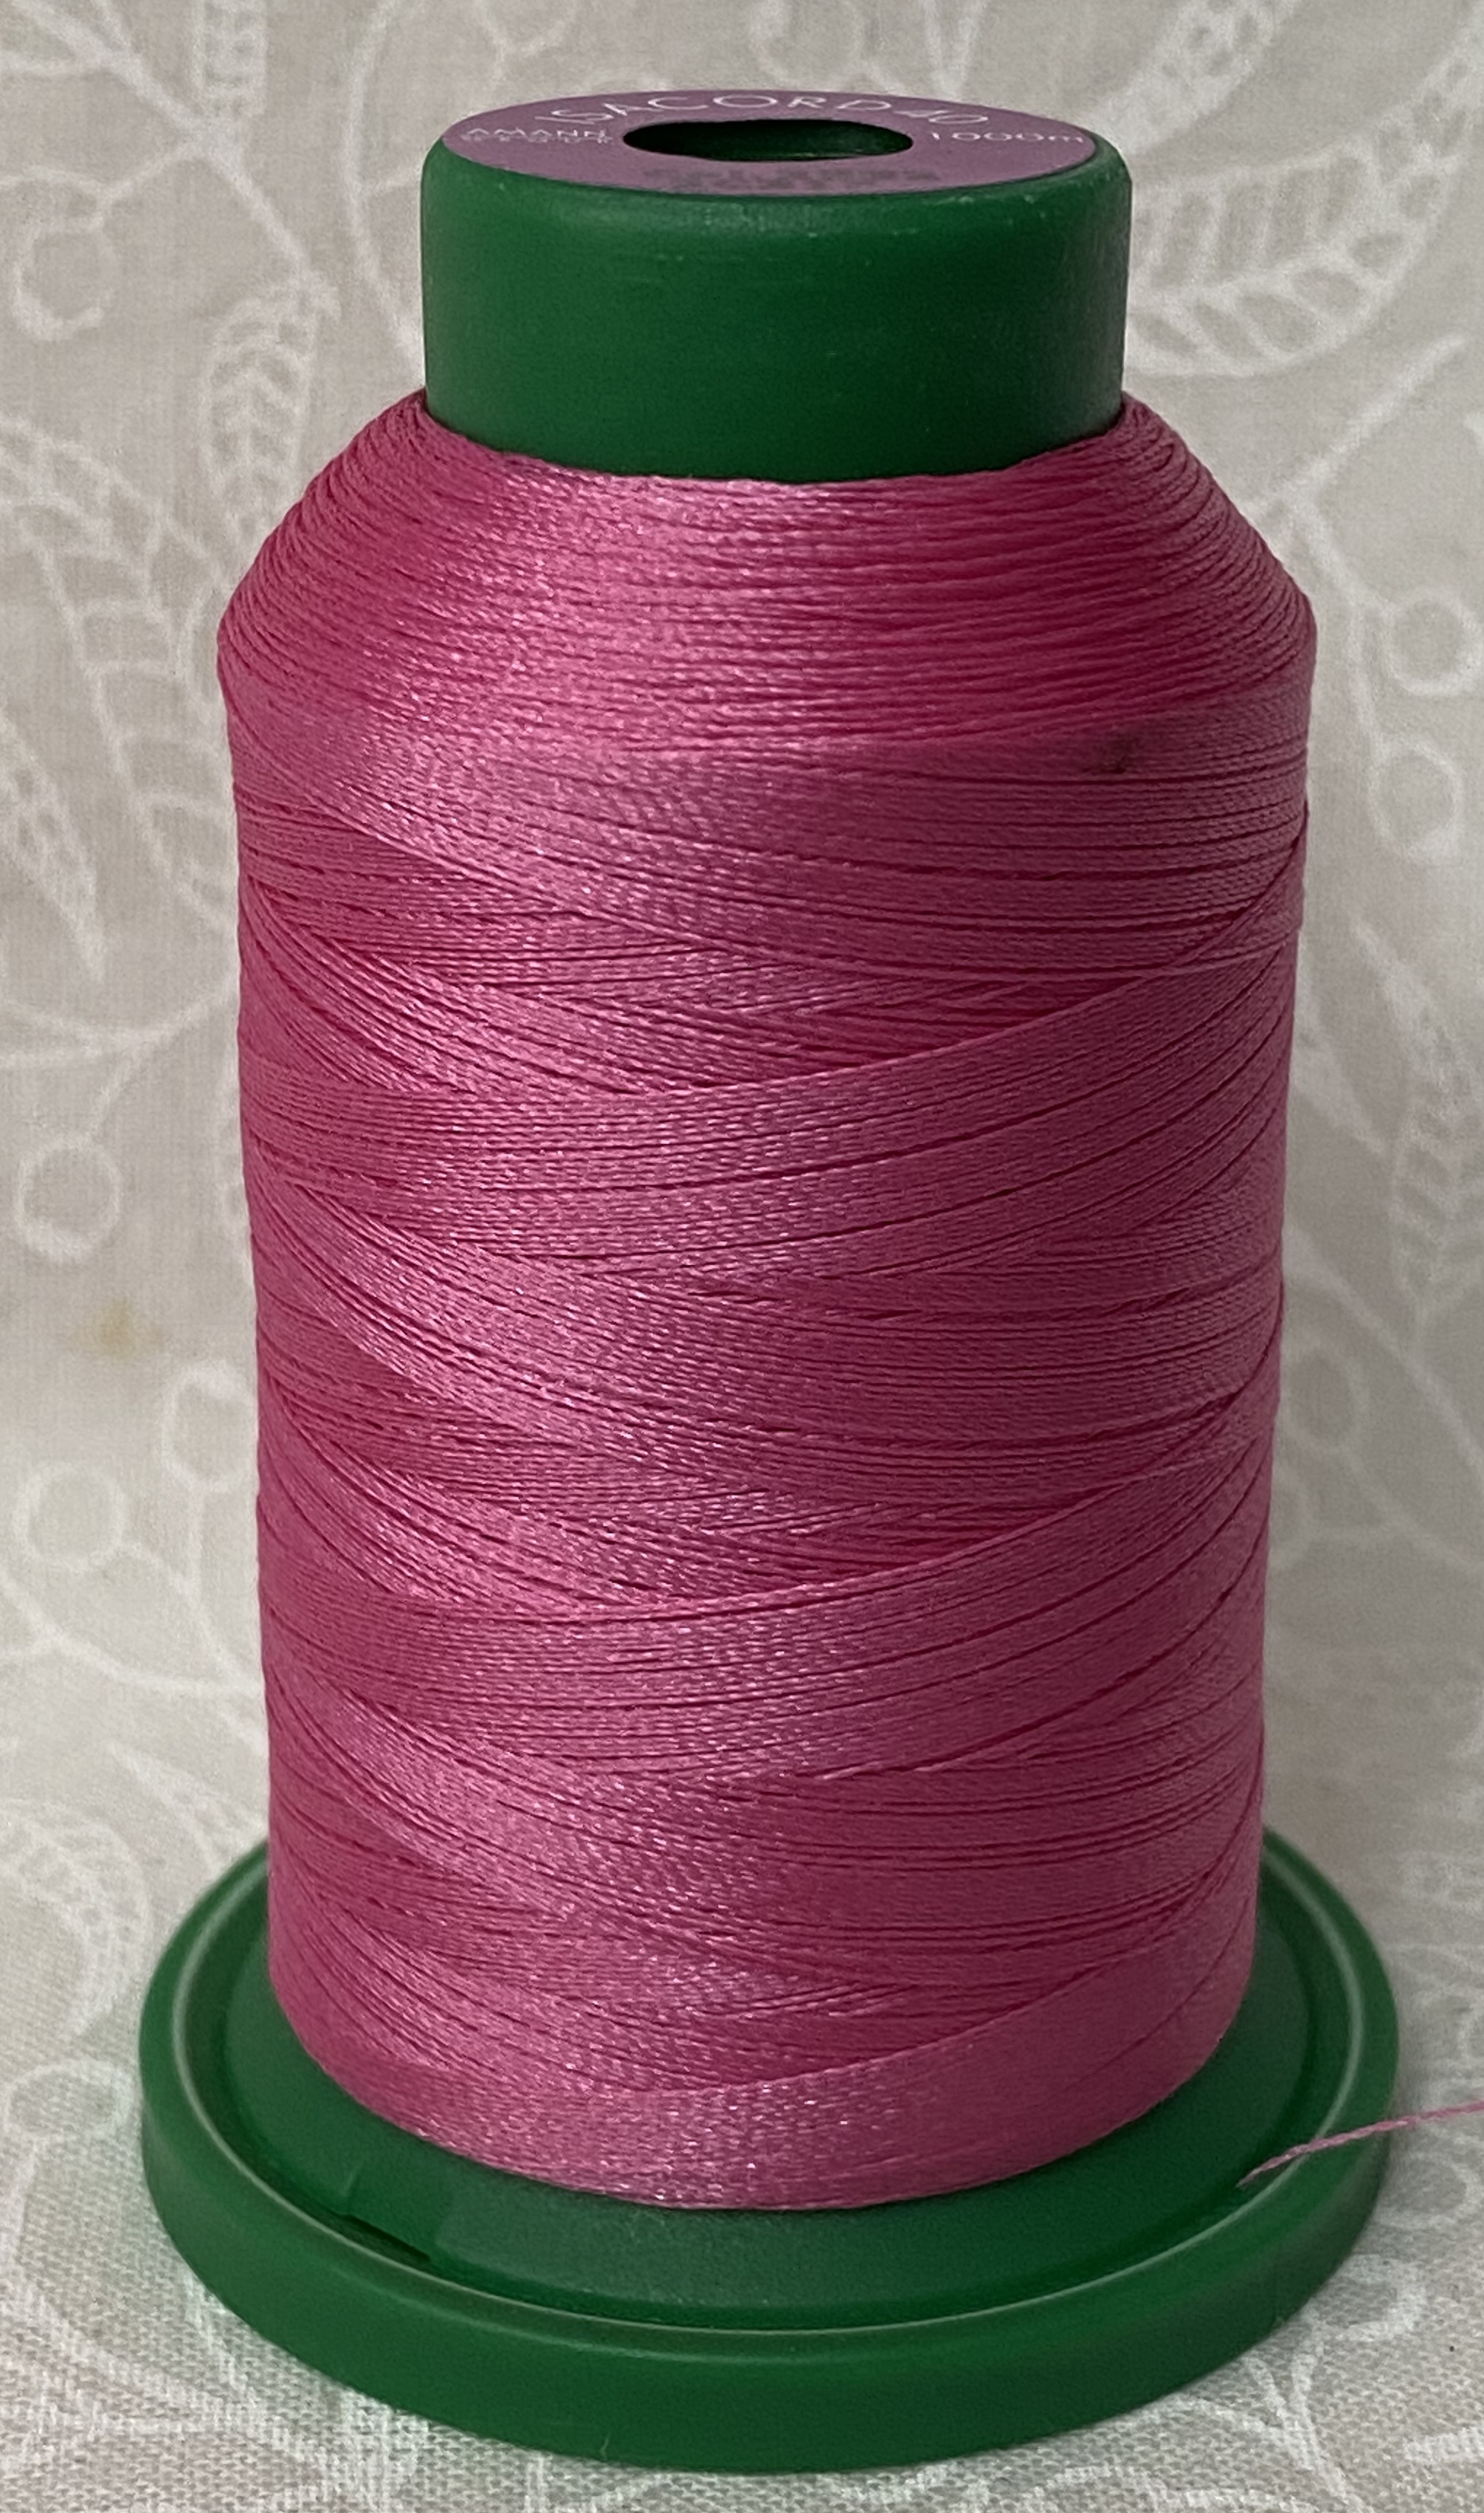 2532 - PRETTY IN PINK - ISACORD EMBROIDERY THREAD 40 WT